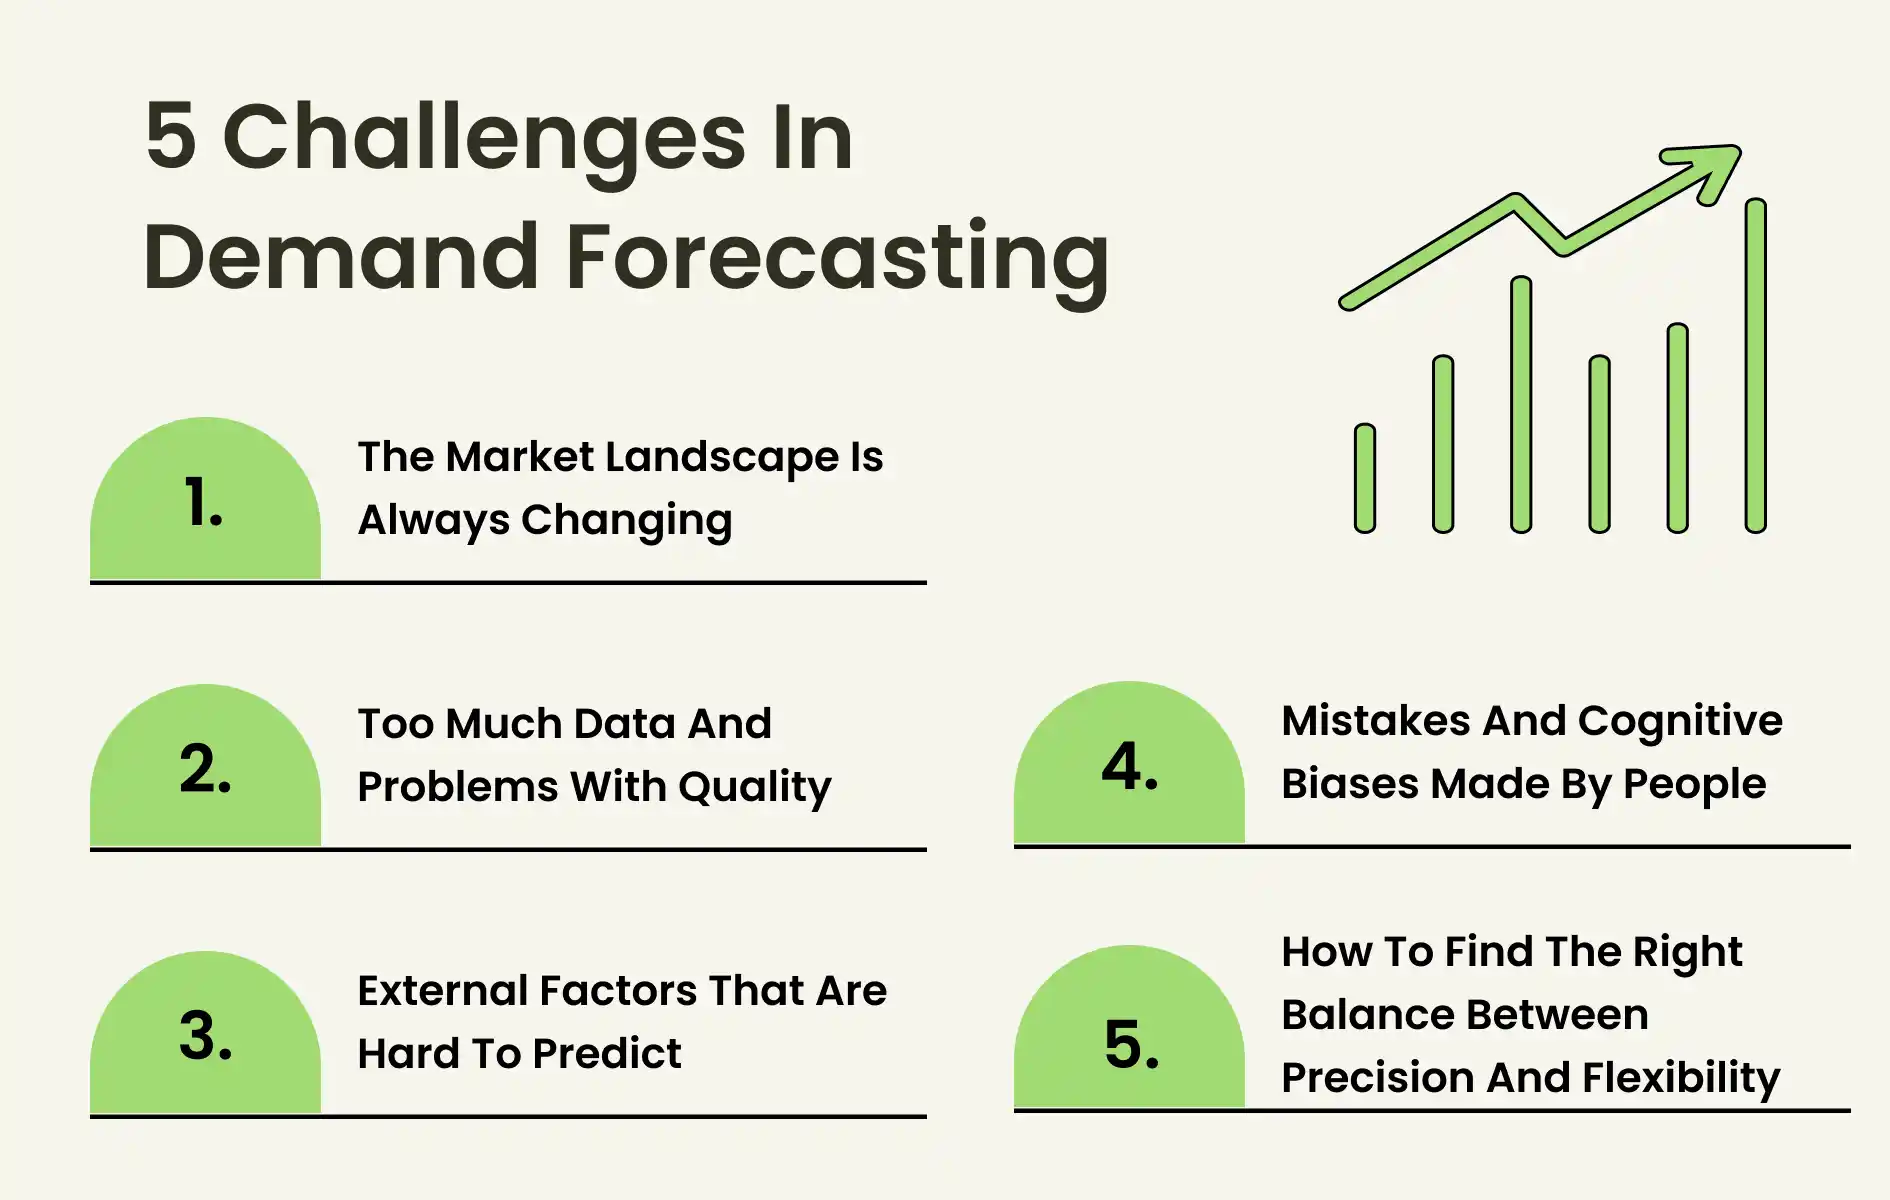 5 Challenges in Demand Forecasting